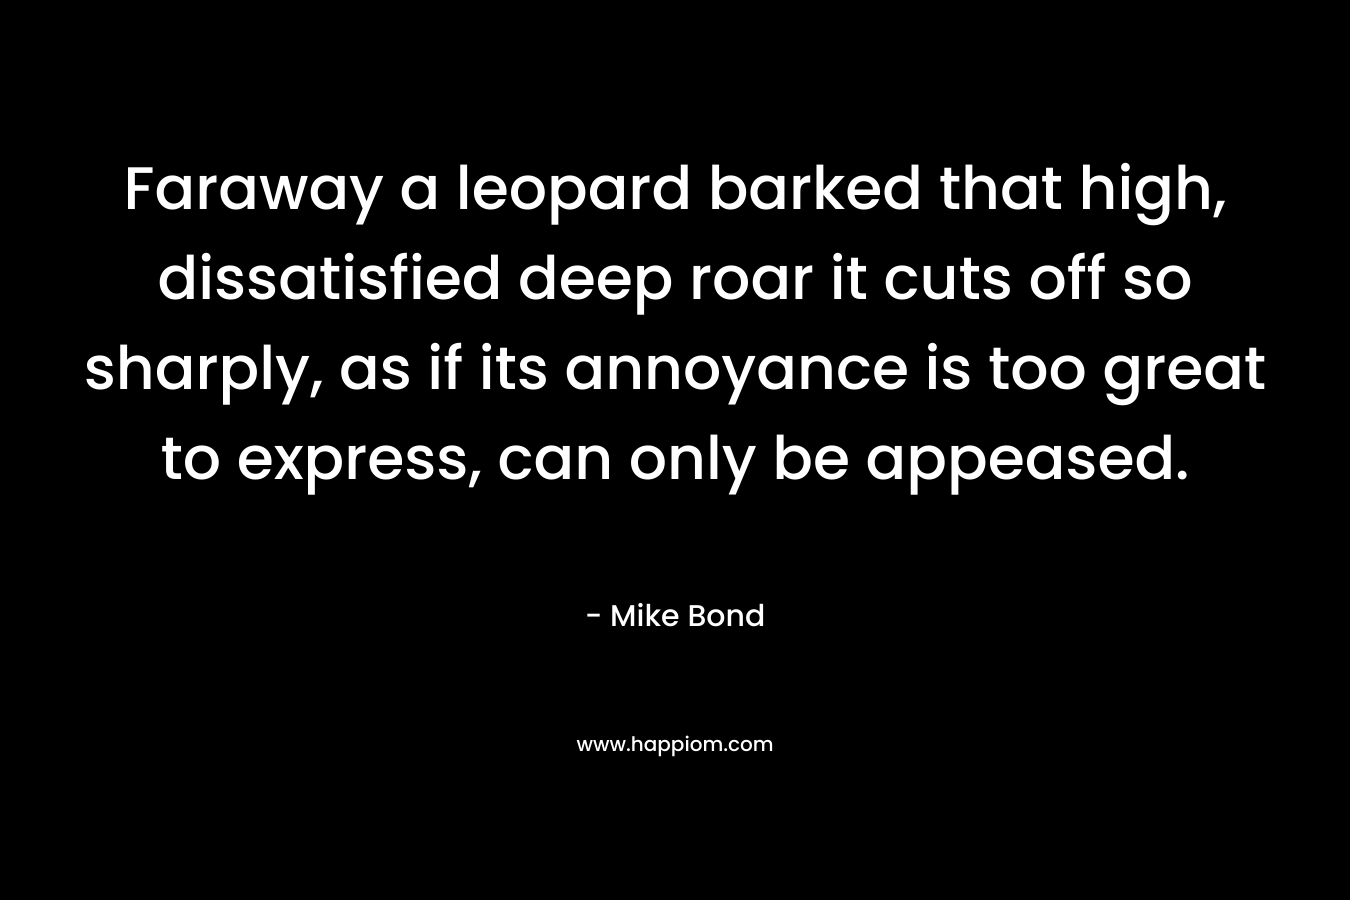 Faraway a leopard barked that high, dissatisfied deep roar it cuts off so sharply, as if its annoyance is too great to express, can only be appeased.